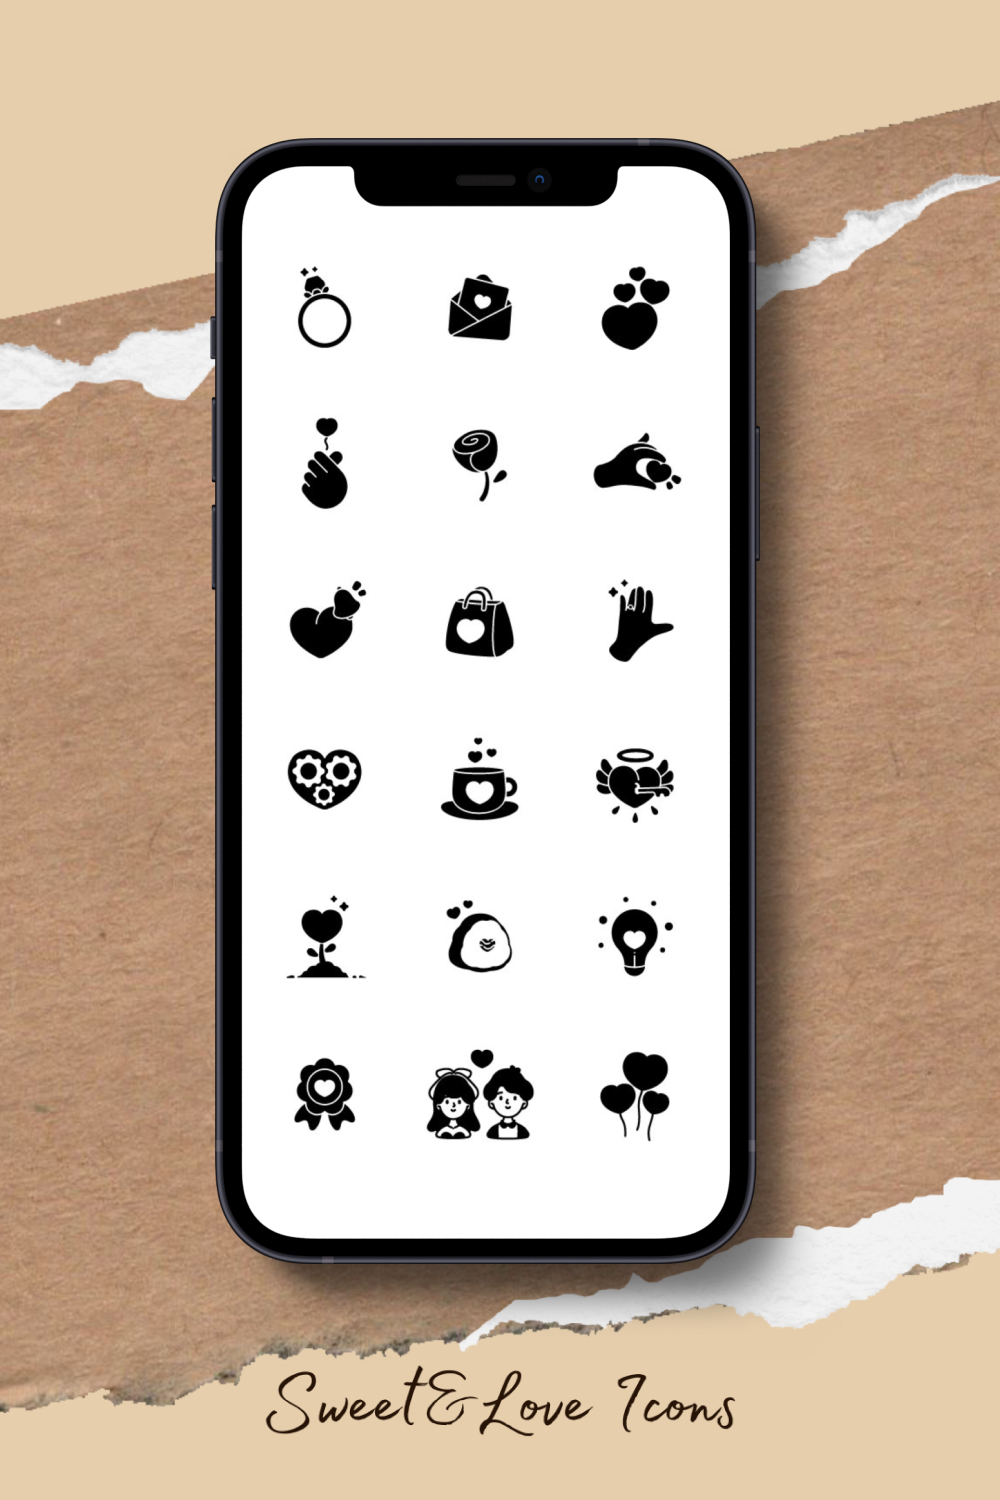 Beautiful black icons on a white background.